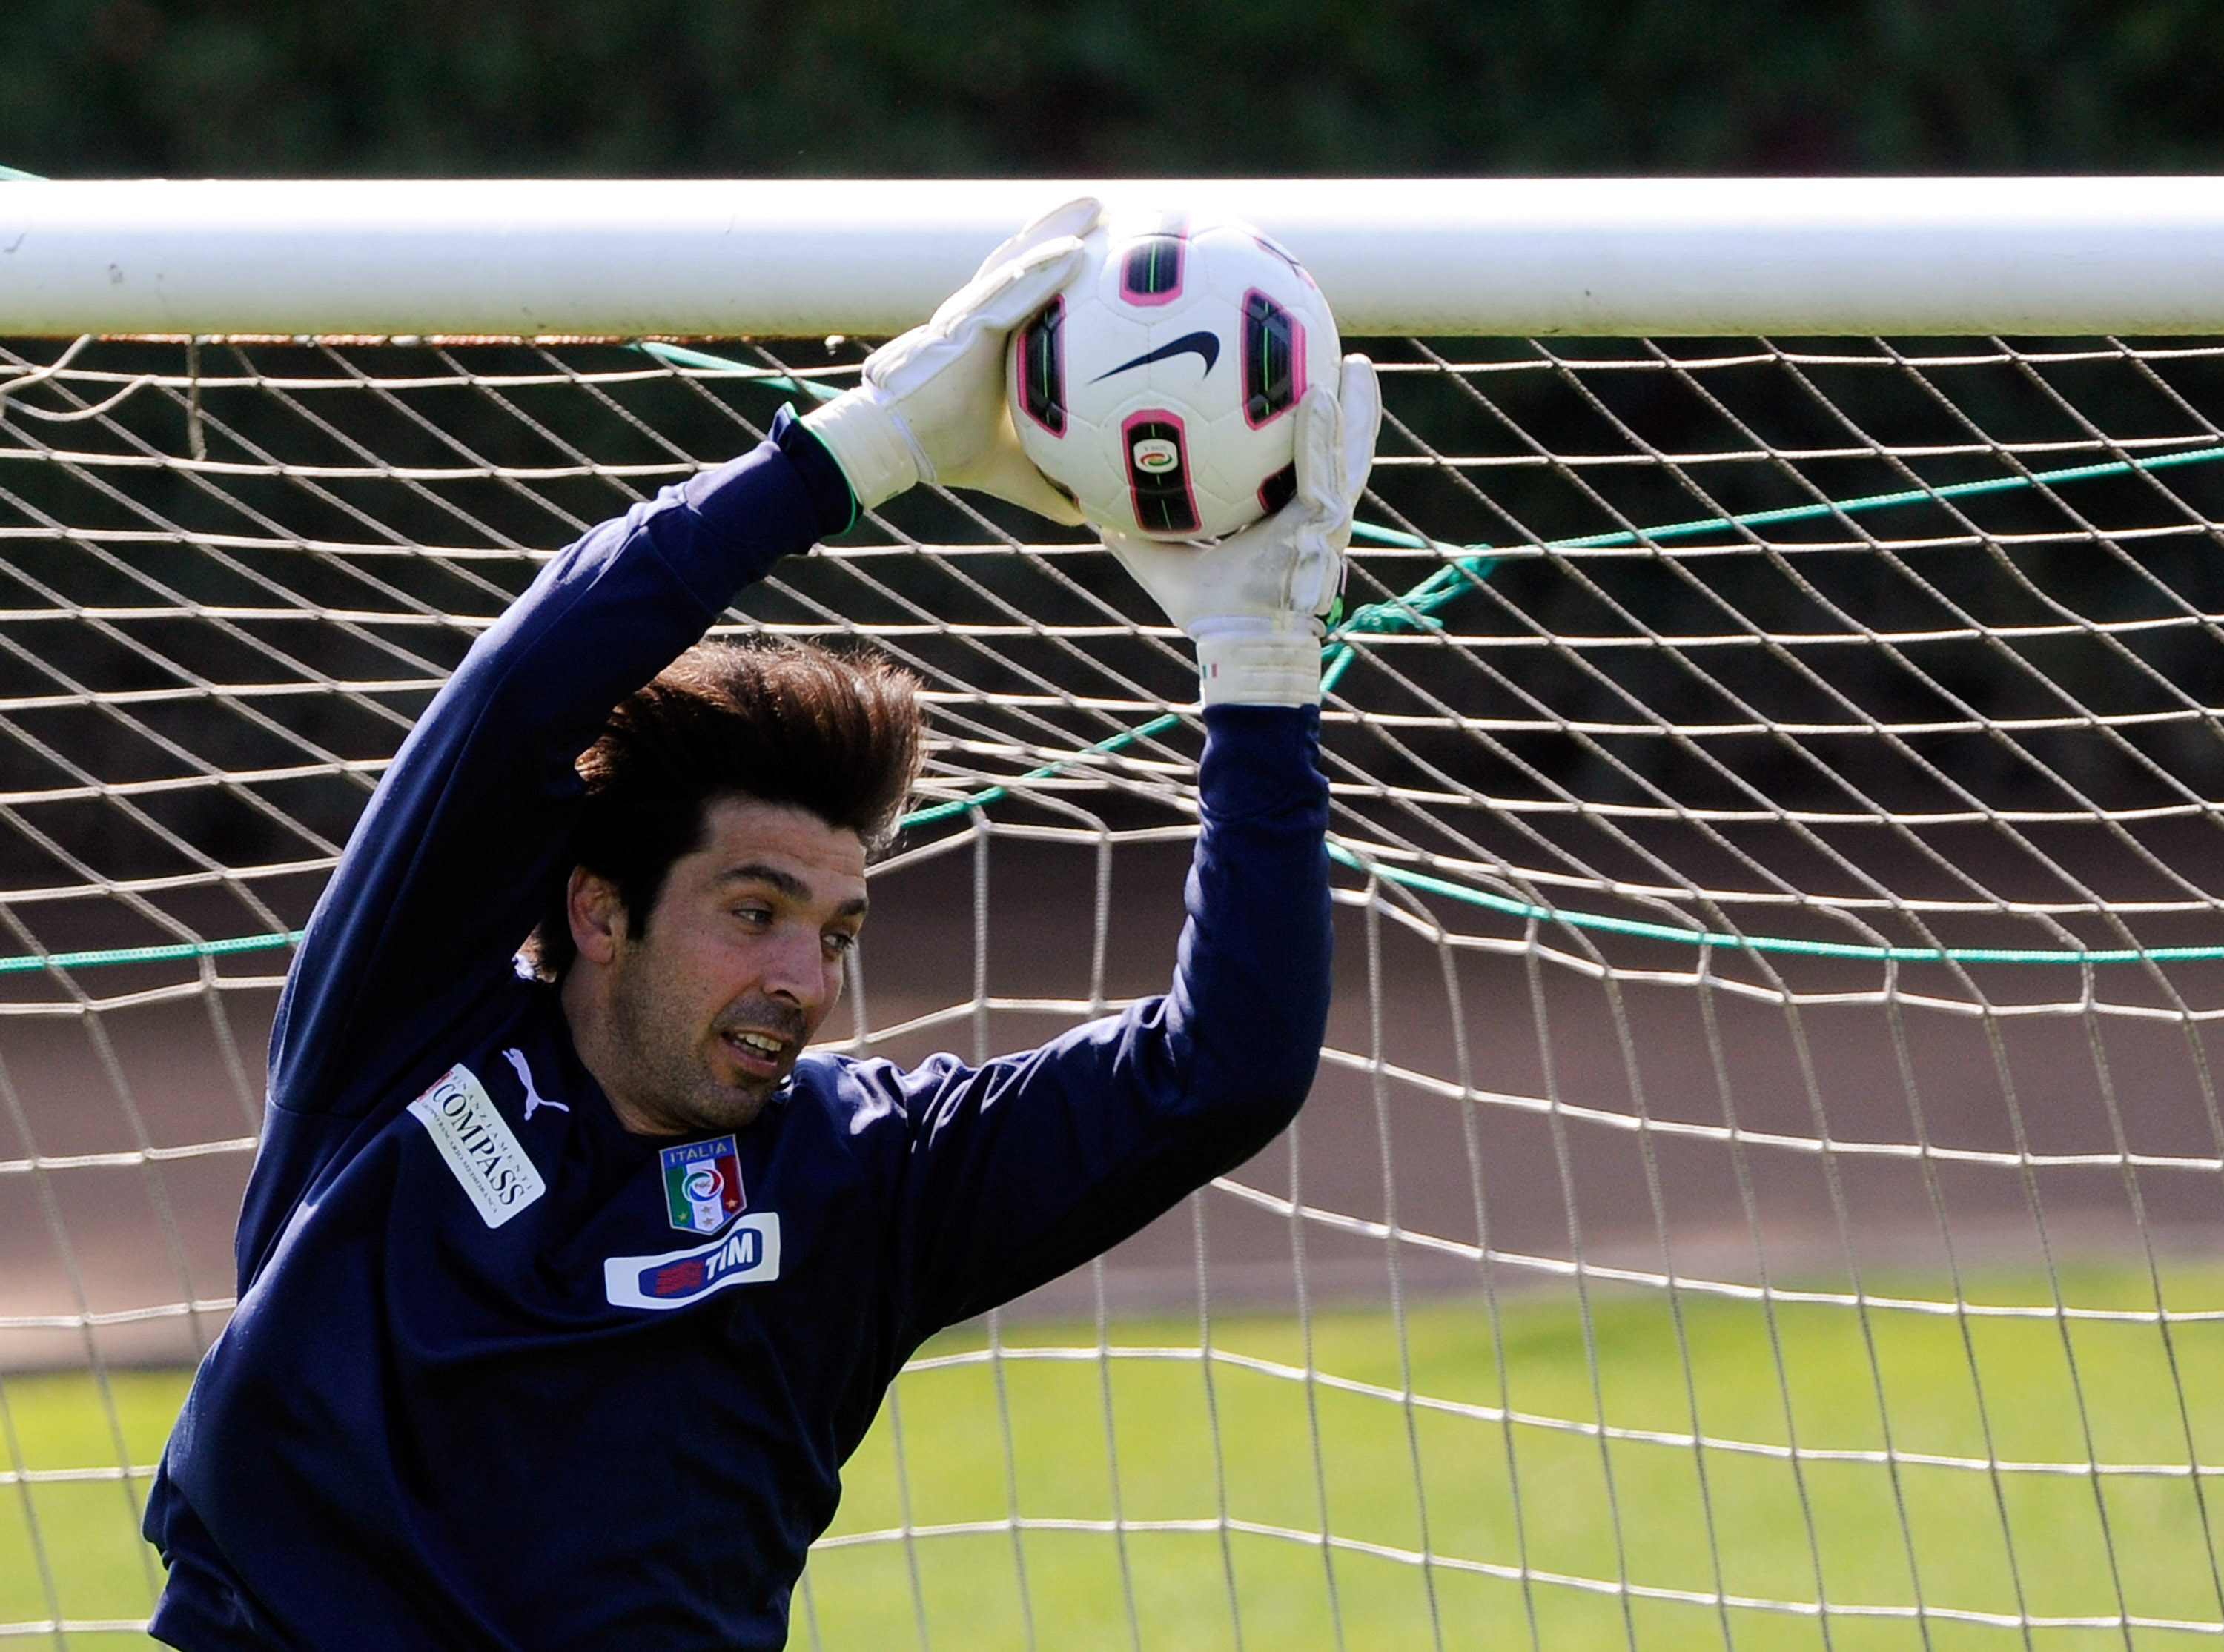 FLORENCE, ITALY - MARCH 22:  Gianluigi Buffon of Italy in action during a training session ahead of their EURO 2012 qualifier against Slovenia at Coverciano on March 22, 2011 in Florence, Italy.  (Photo by Claudio Villa/Getty Images)